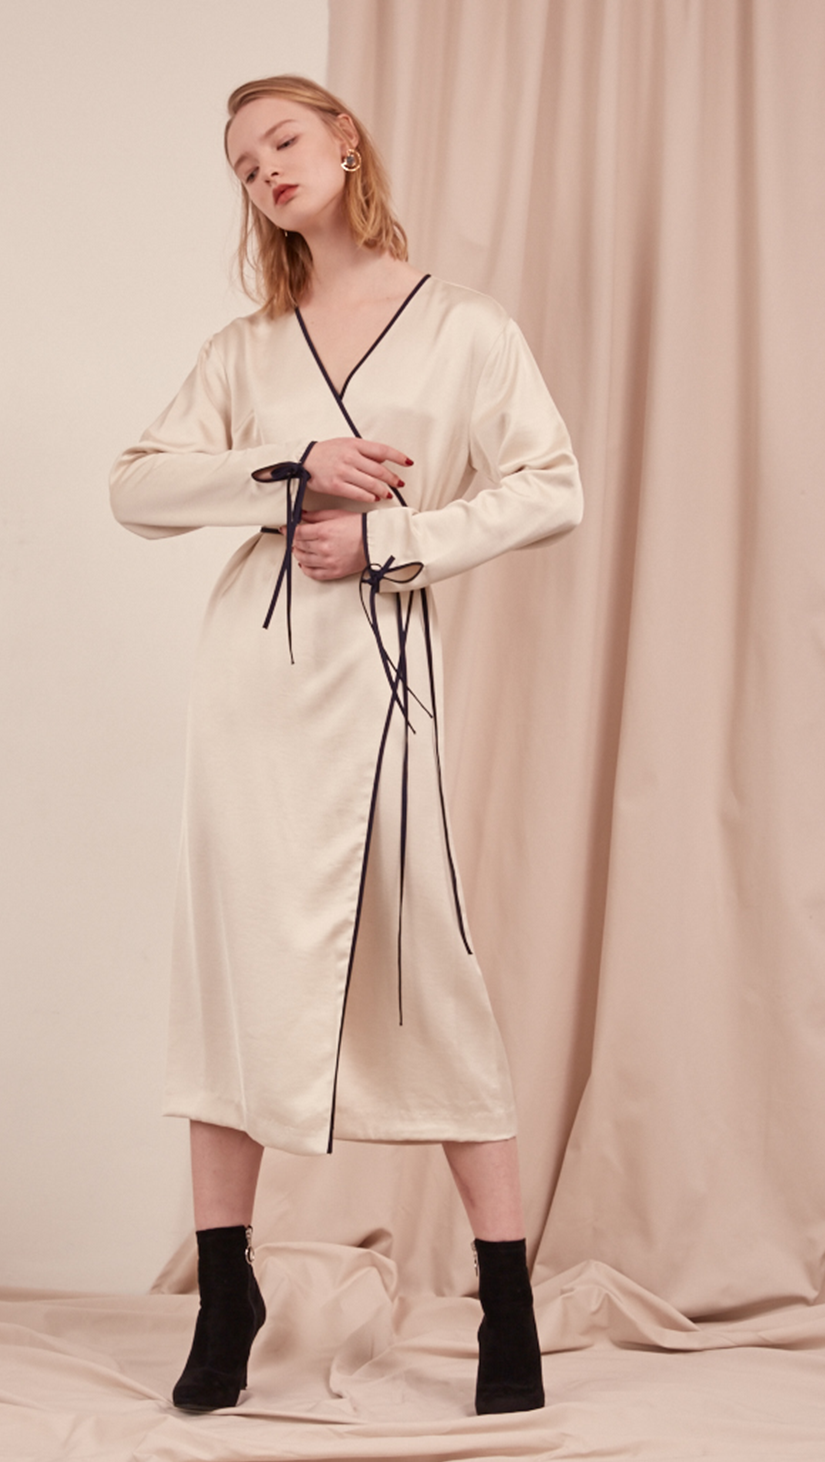 The Gabe Dress in Ivory. With wrap front, self-tie at waist. Lightweight. Super soft feel. Midi length, particularly long in length.